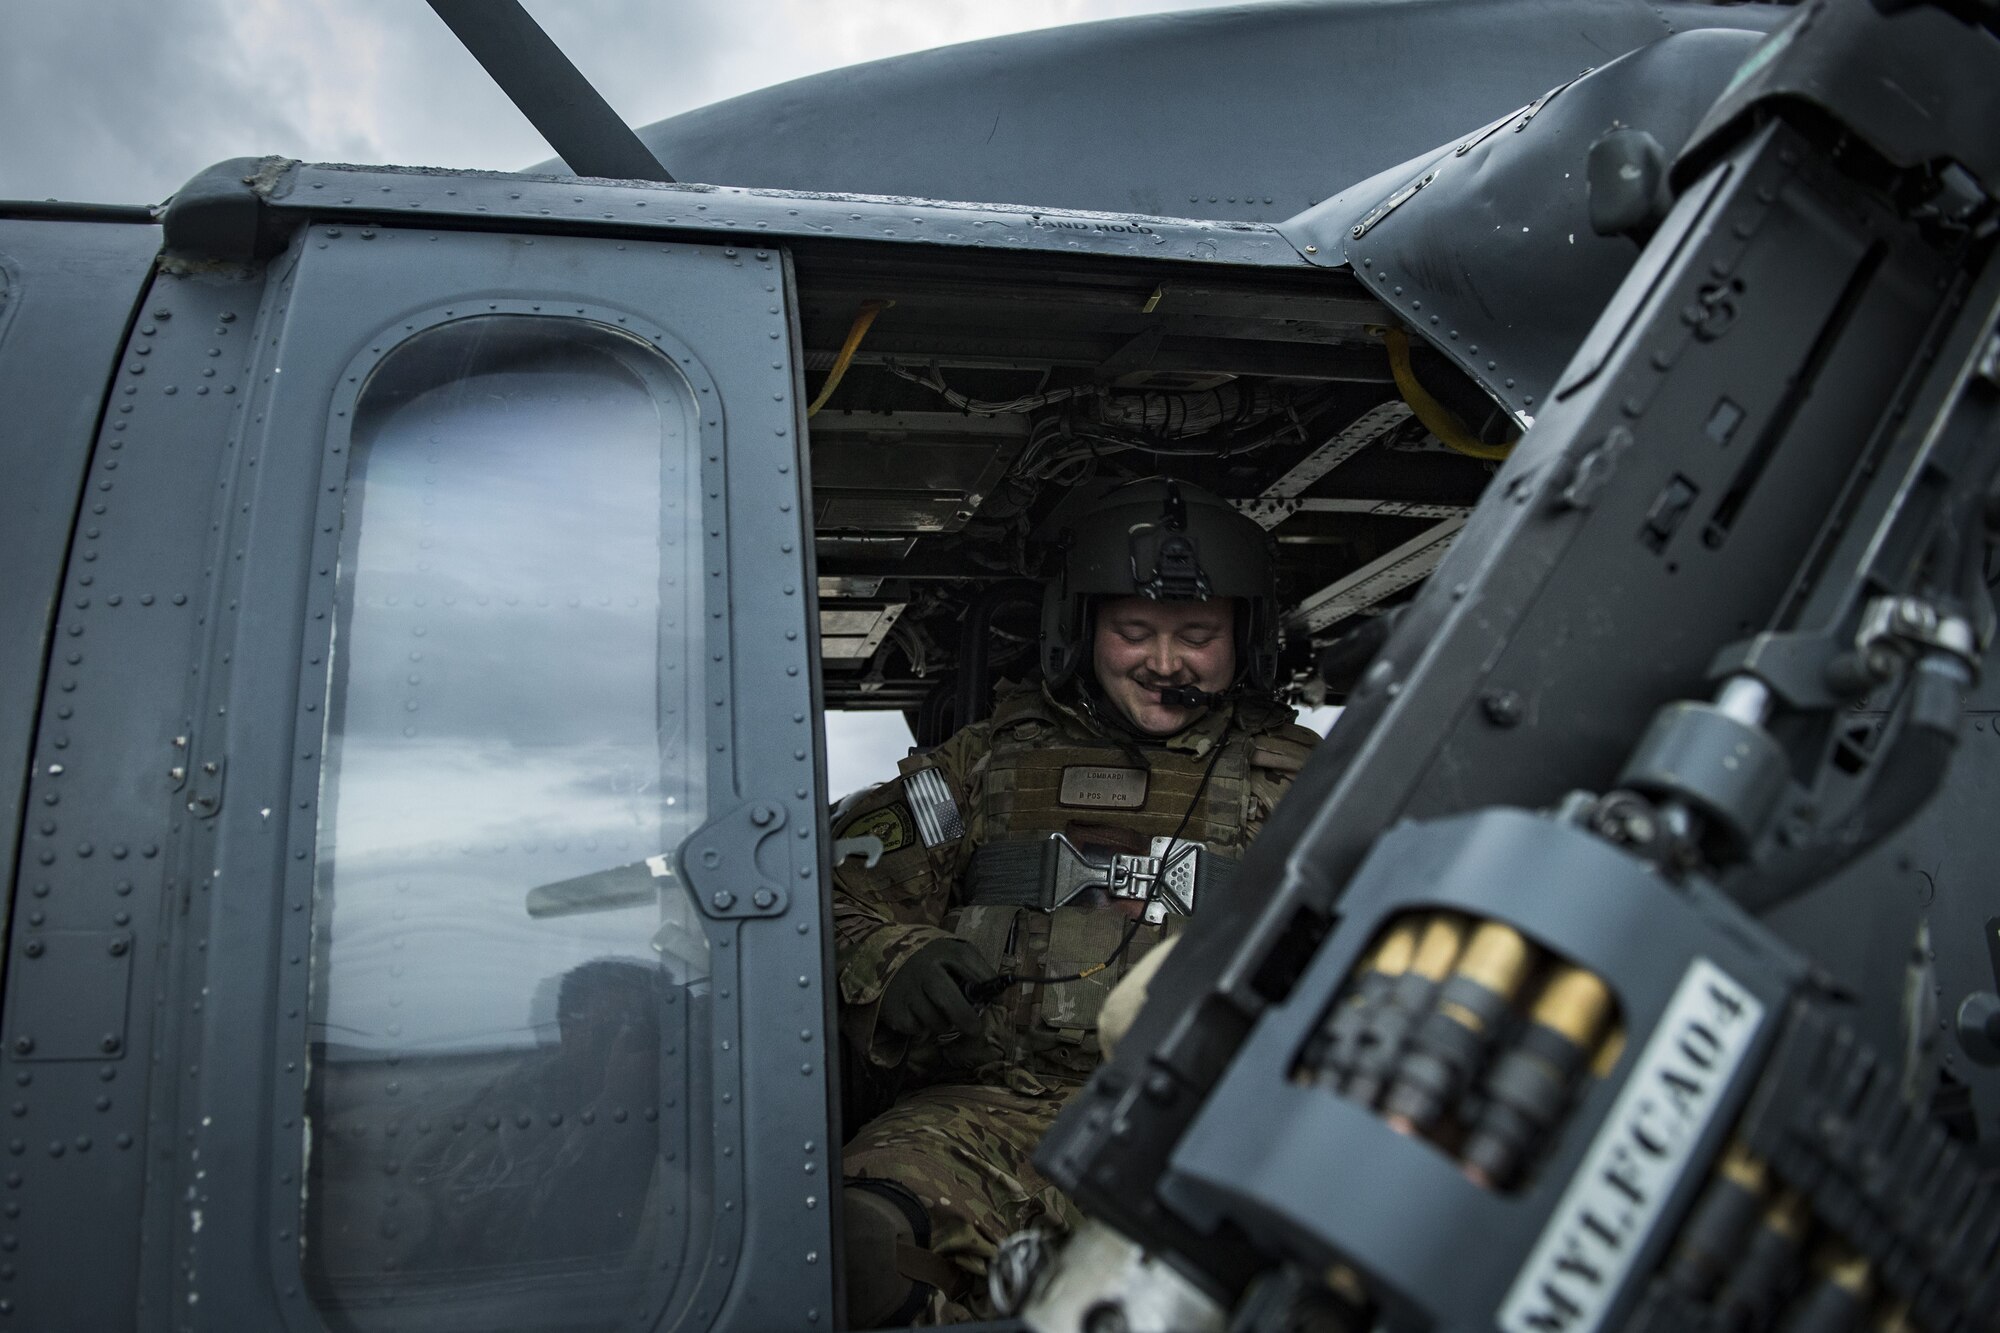 Senior Airman Joseph Lombardi, 41st Rescue Squadron special missions aviator, smiles while adjusting his gear, Jan. 22, 2018, at Moody Air Force Base, Ga. The 41st RQS is responsible for maintaining combat-ready personnel for recovery missions. To achieve this, members of the squadron constantly train on day and nighttime operations to maintain proficiency. (U.S. Air Force photo by Senior Airman Janiqua P. Robinson)